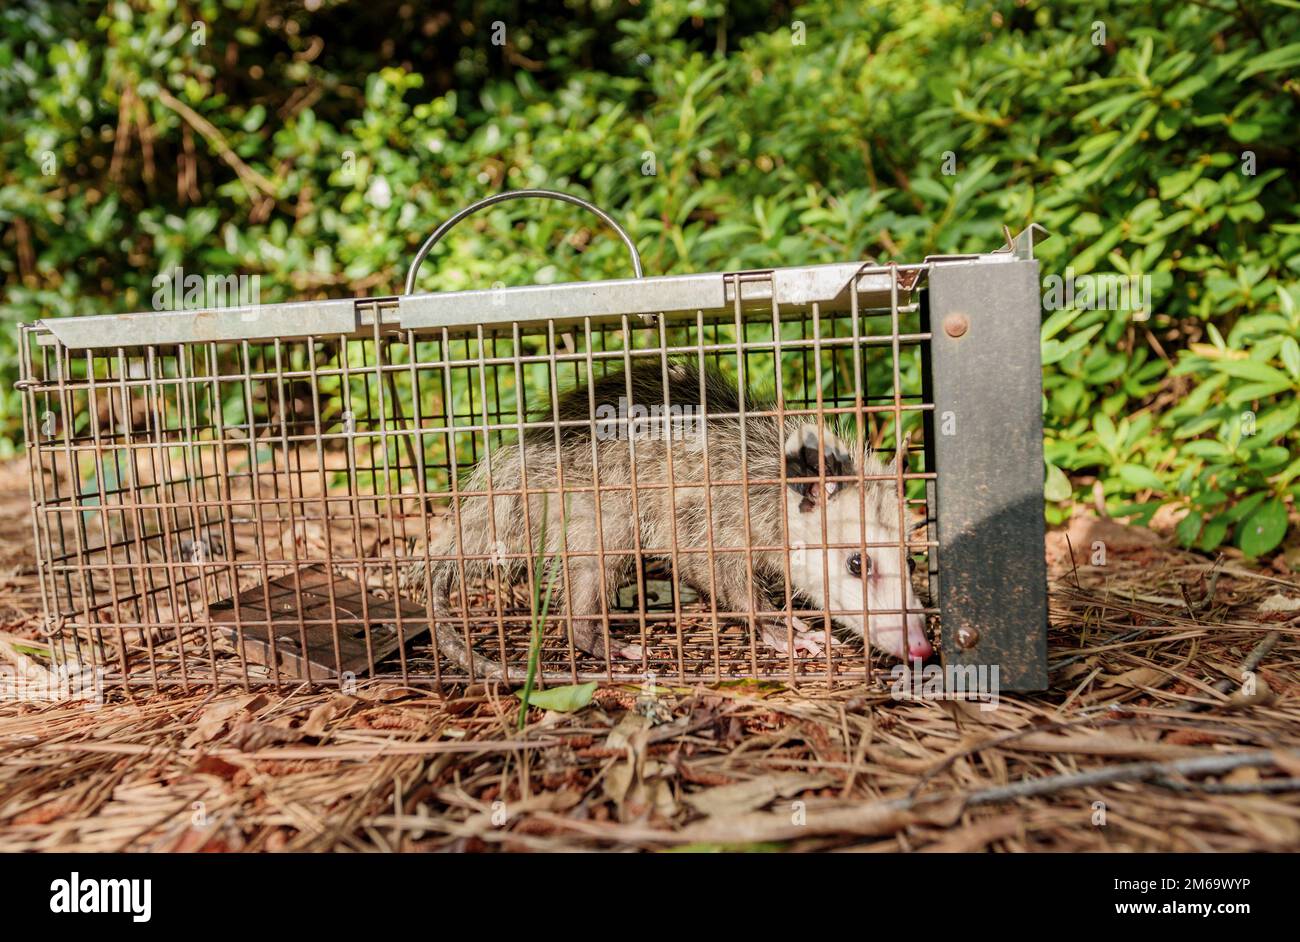 Possum in live humane trap. Trapped opossum marsupial. Pest and rodent removal cage. Catch and release wildlife animal control service. Stock Photo